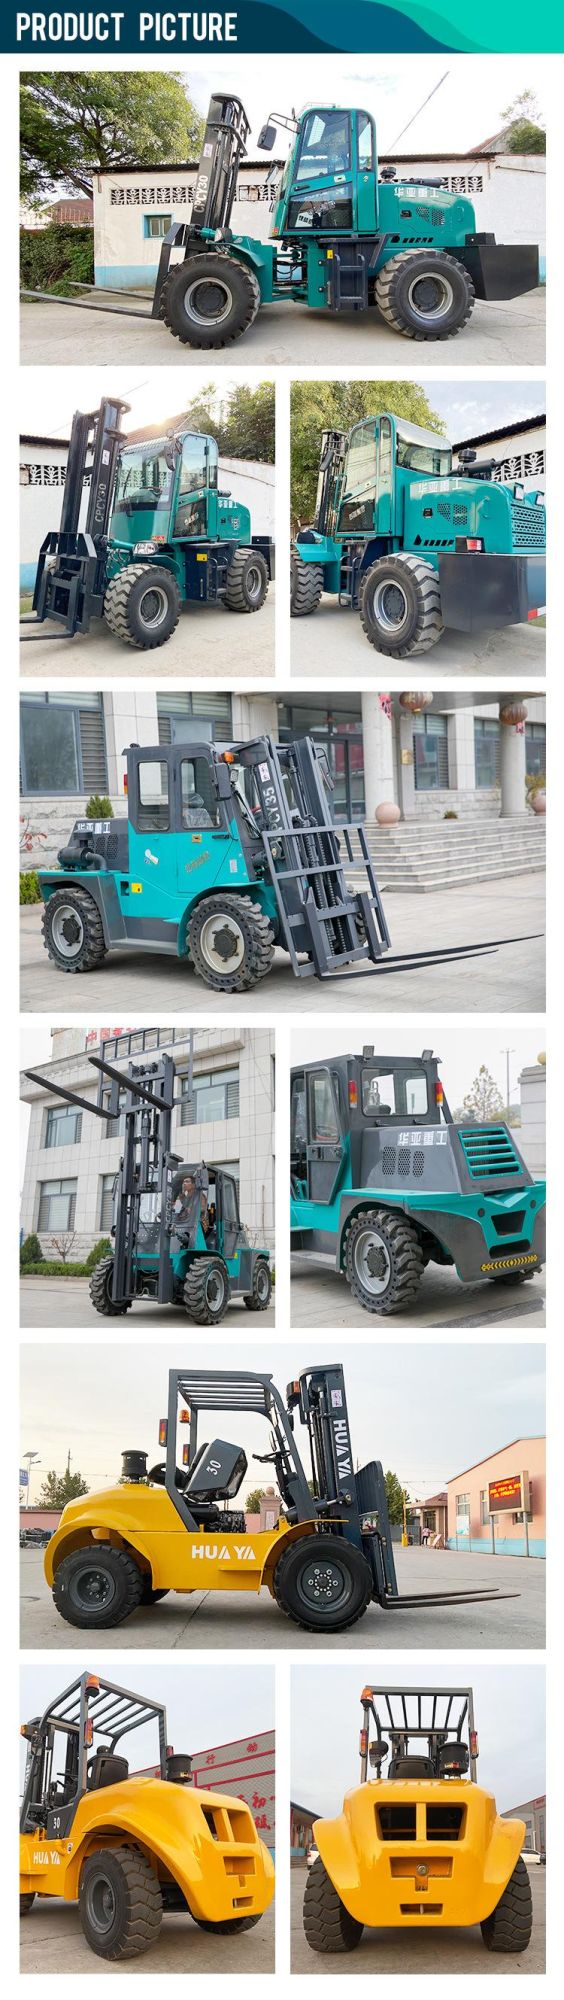 New 2022 Huaya China off Road Rough Terrain Rought 4X4 Forklift FT4*4e